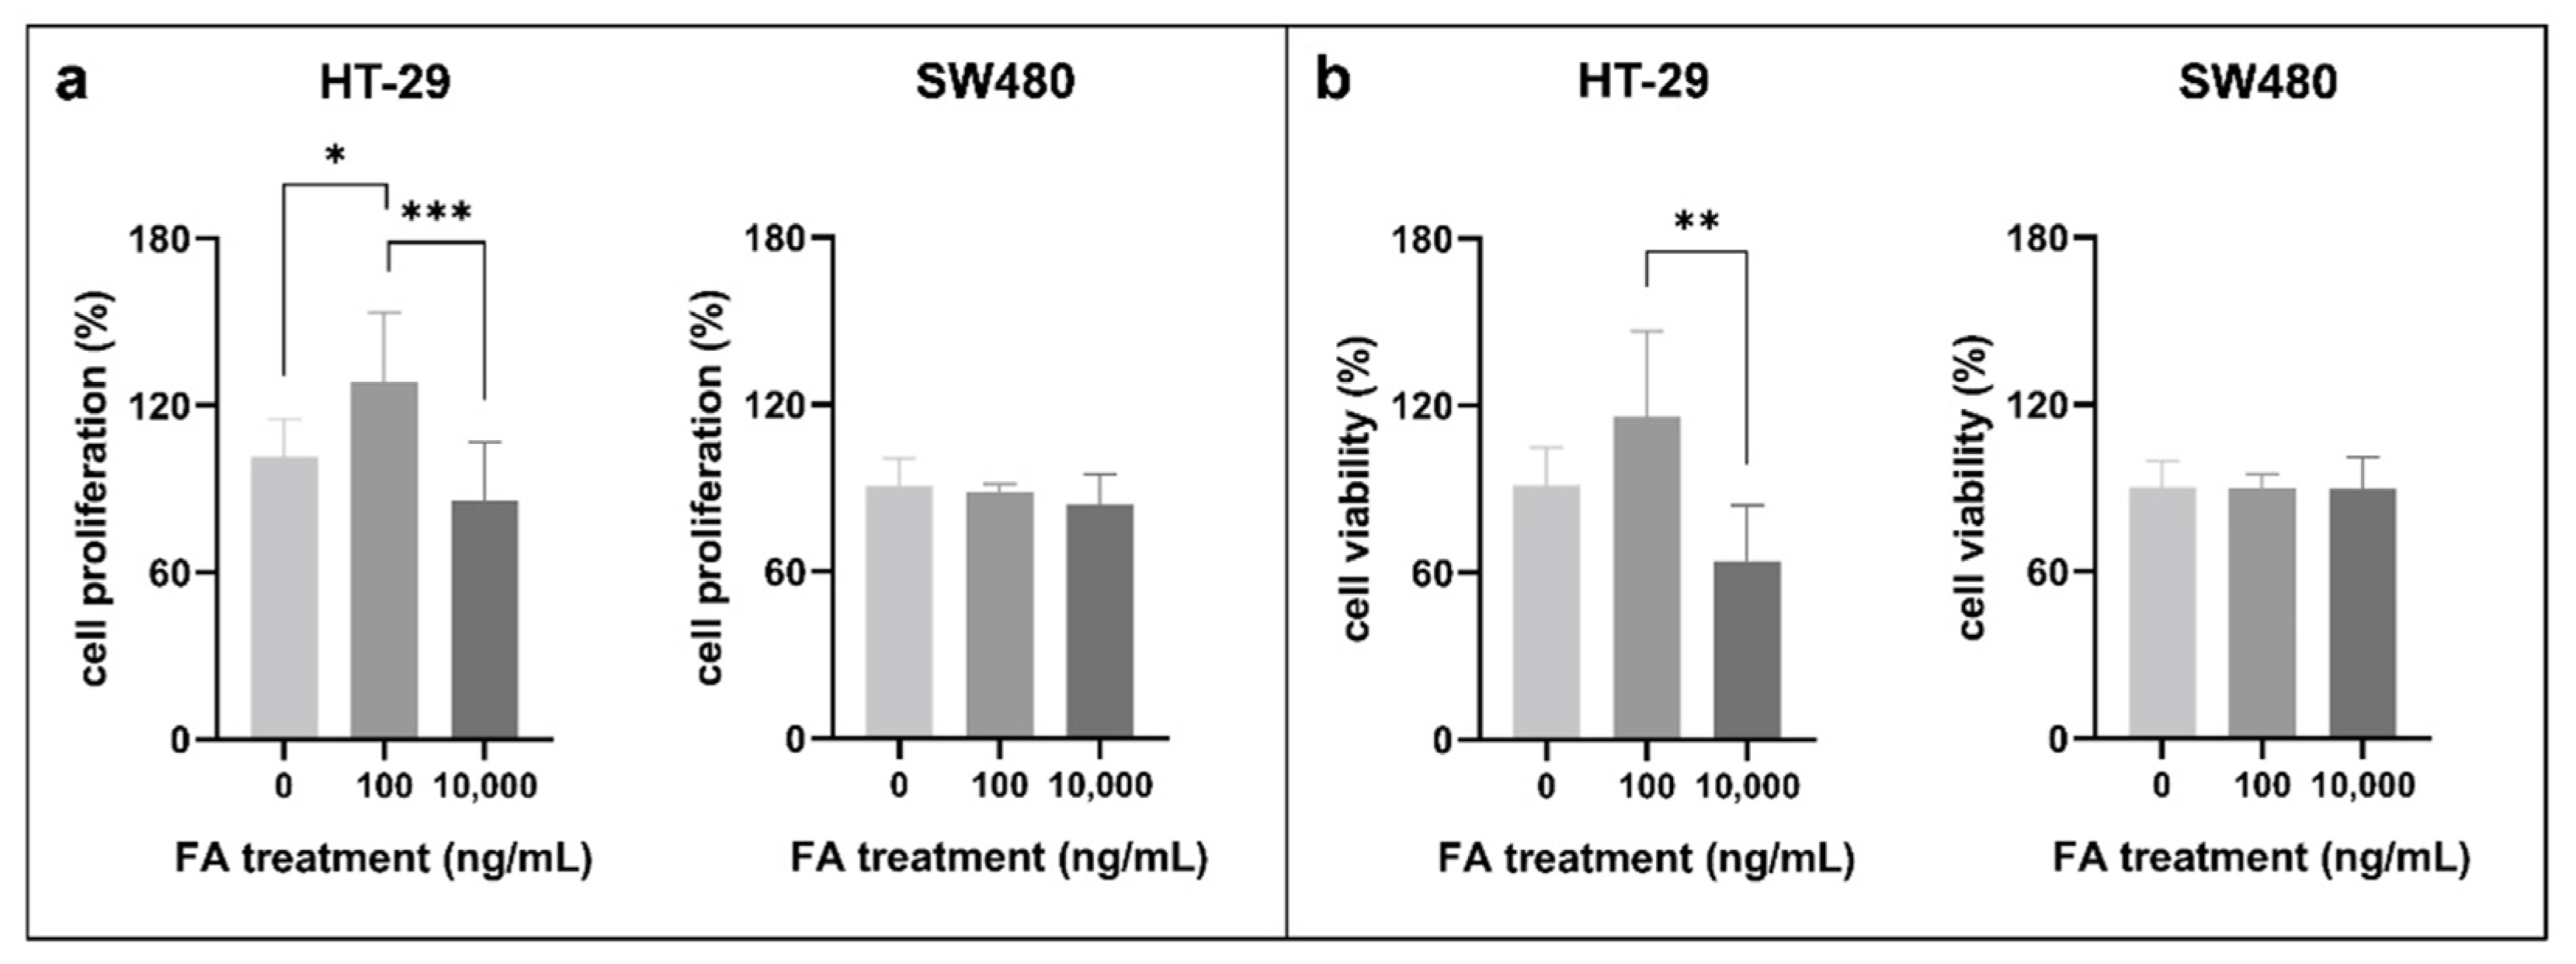 Cancers | Free Full-Text | Folic Acid Treatment Directly Influences the  Genetic and Epigenetic Regulation along with the Associated Cellular  Maintenance Processes of HT-29 and SW480 Colorectal Cancer Cell Lines